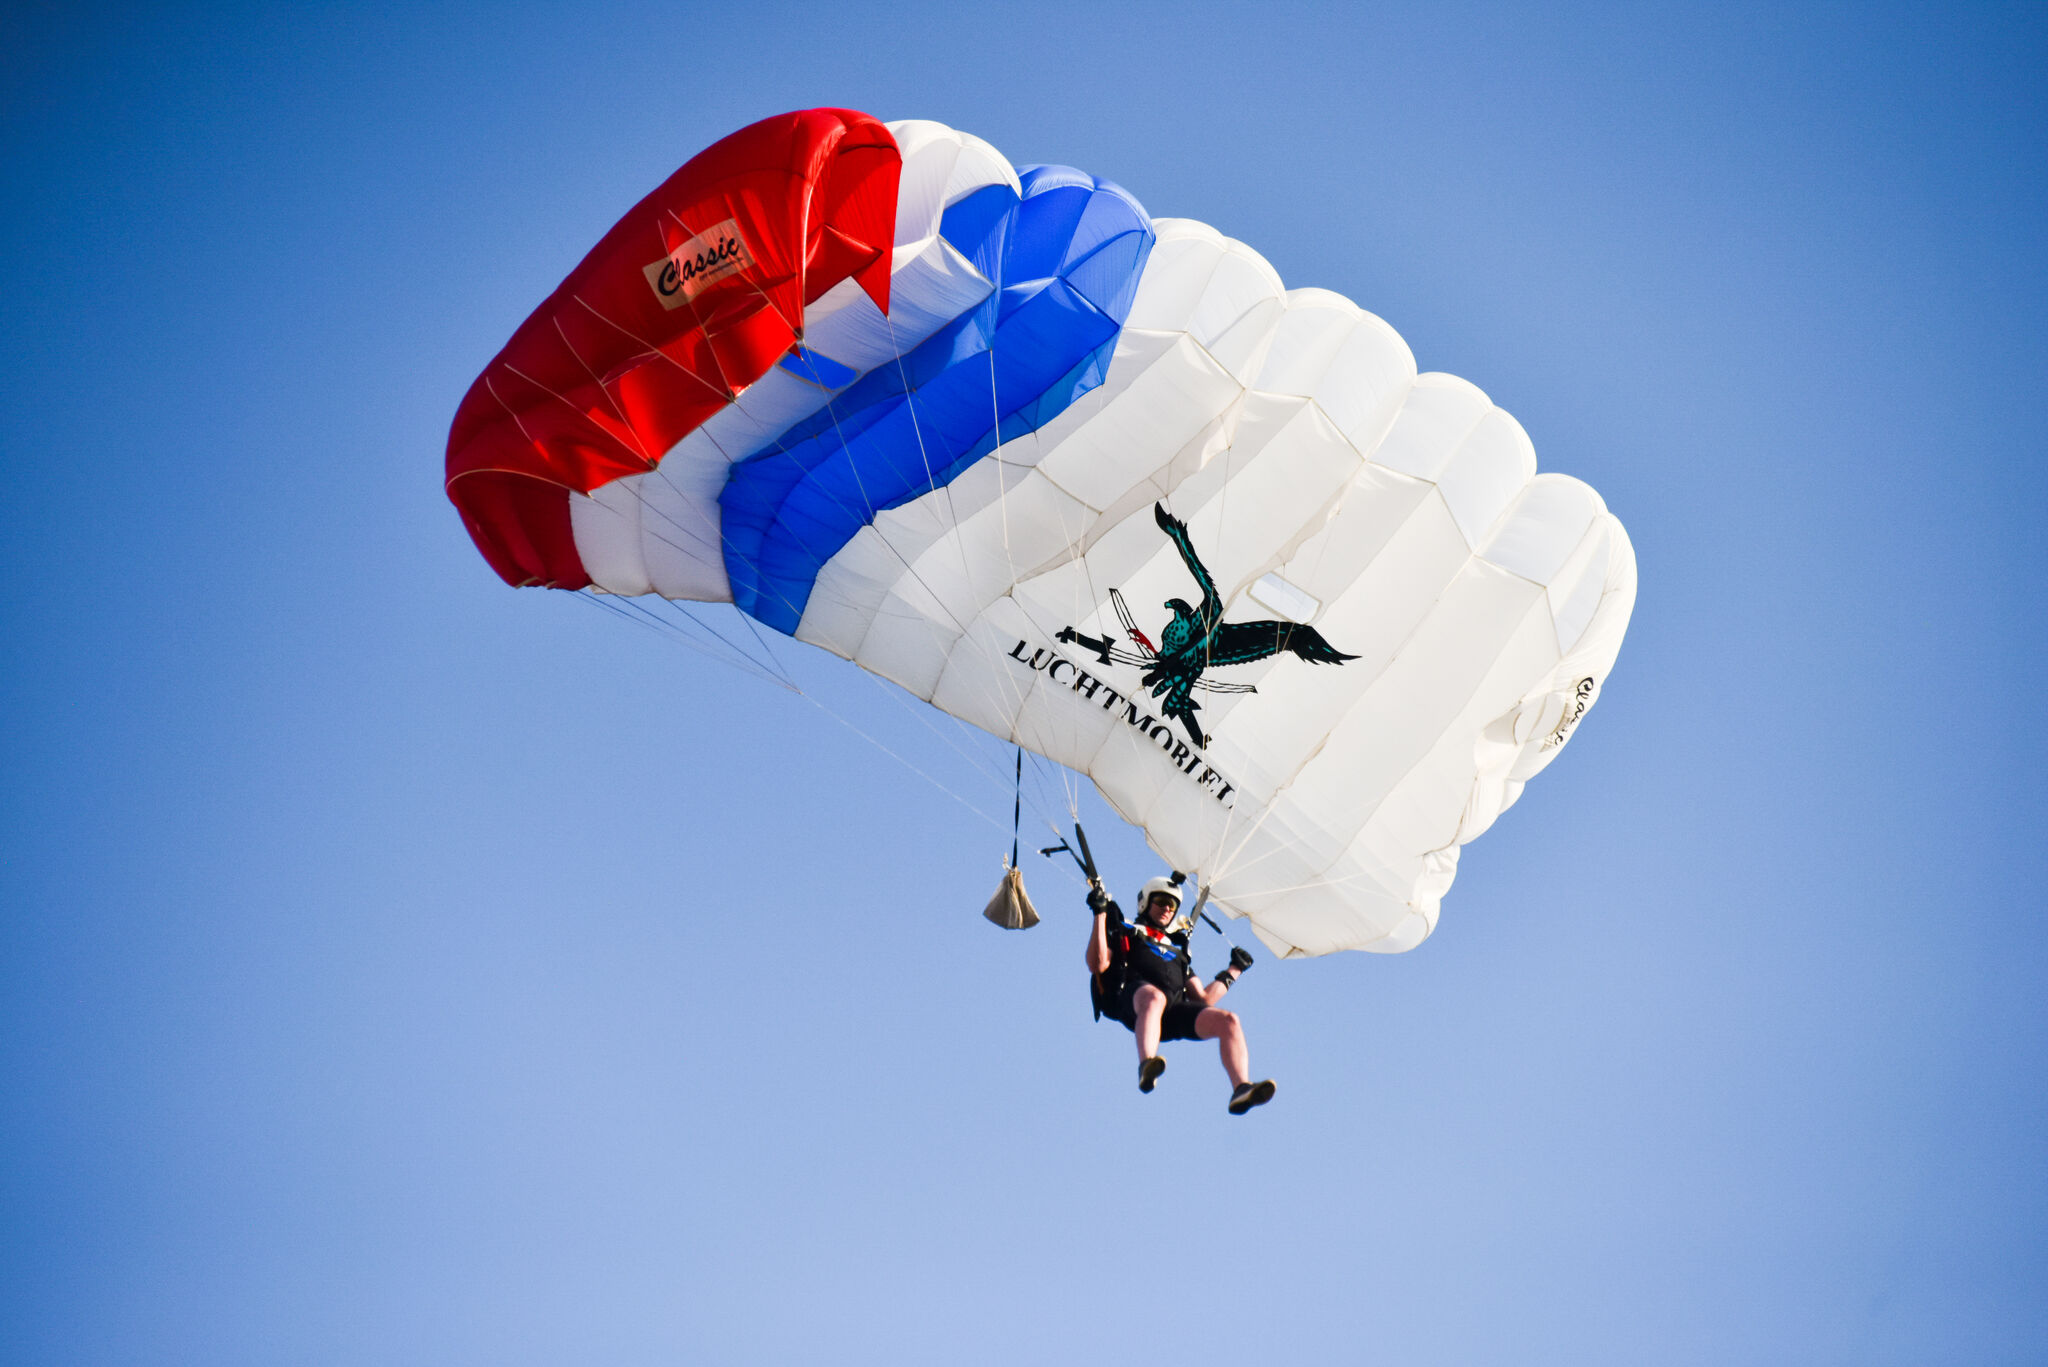 44th Wmc Parachuting Doha Qat The First Verdicts Are In